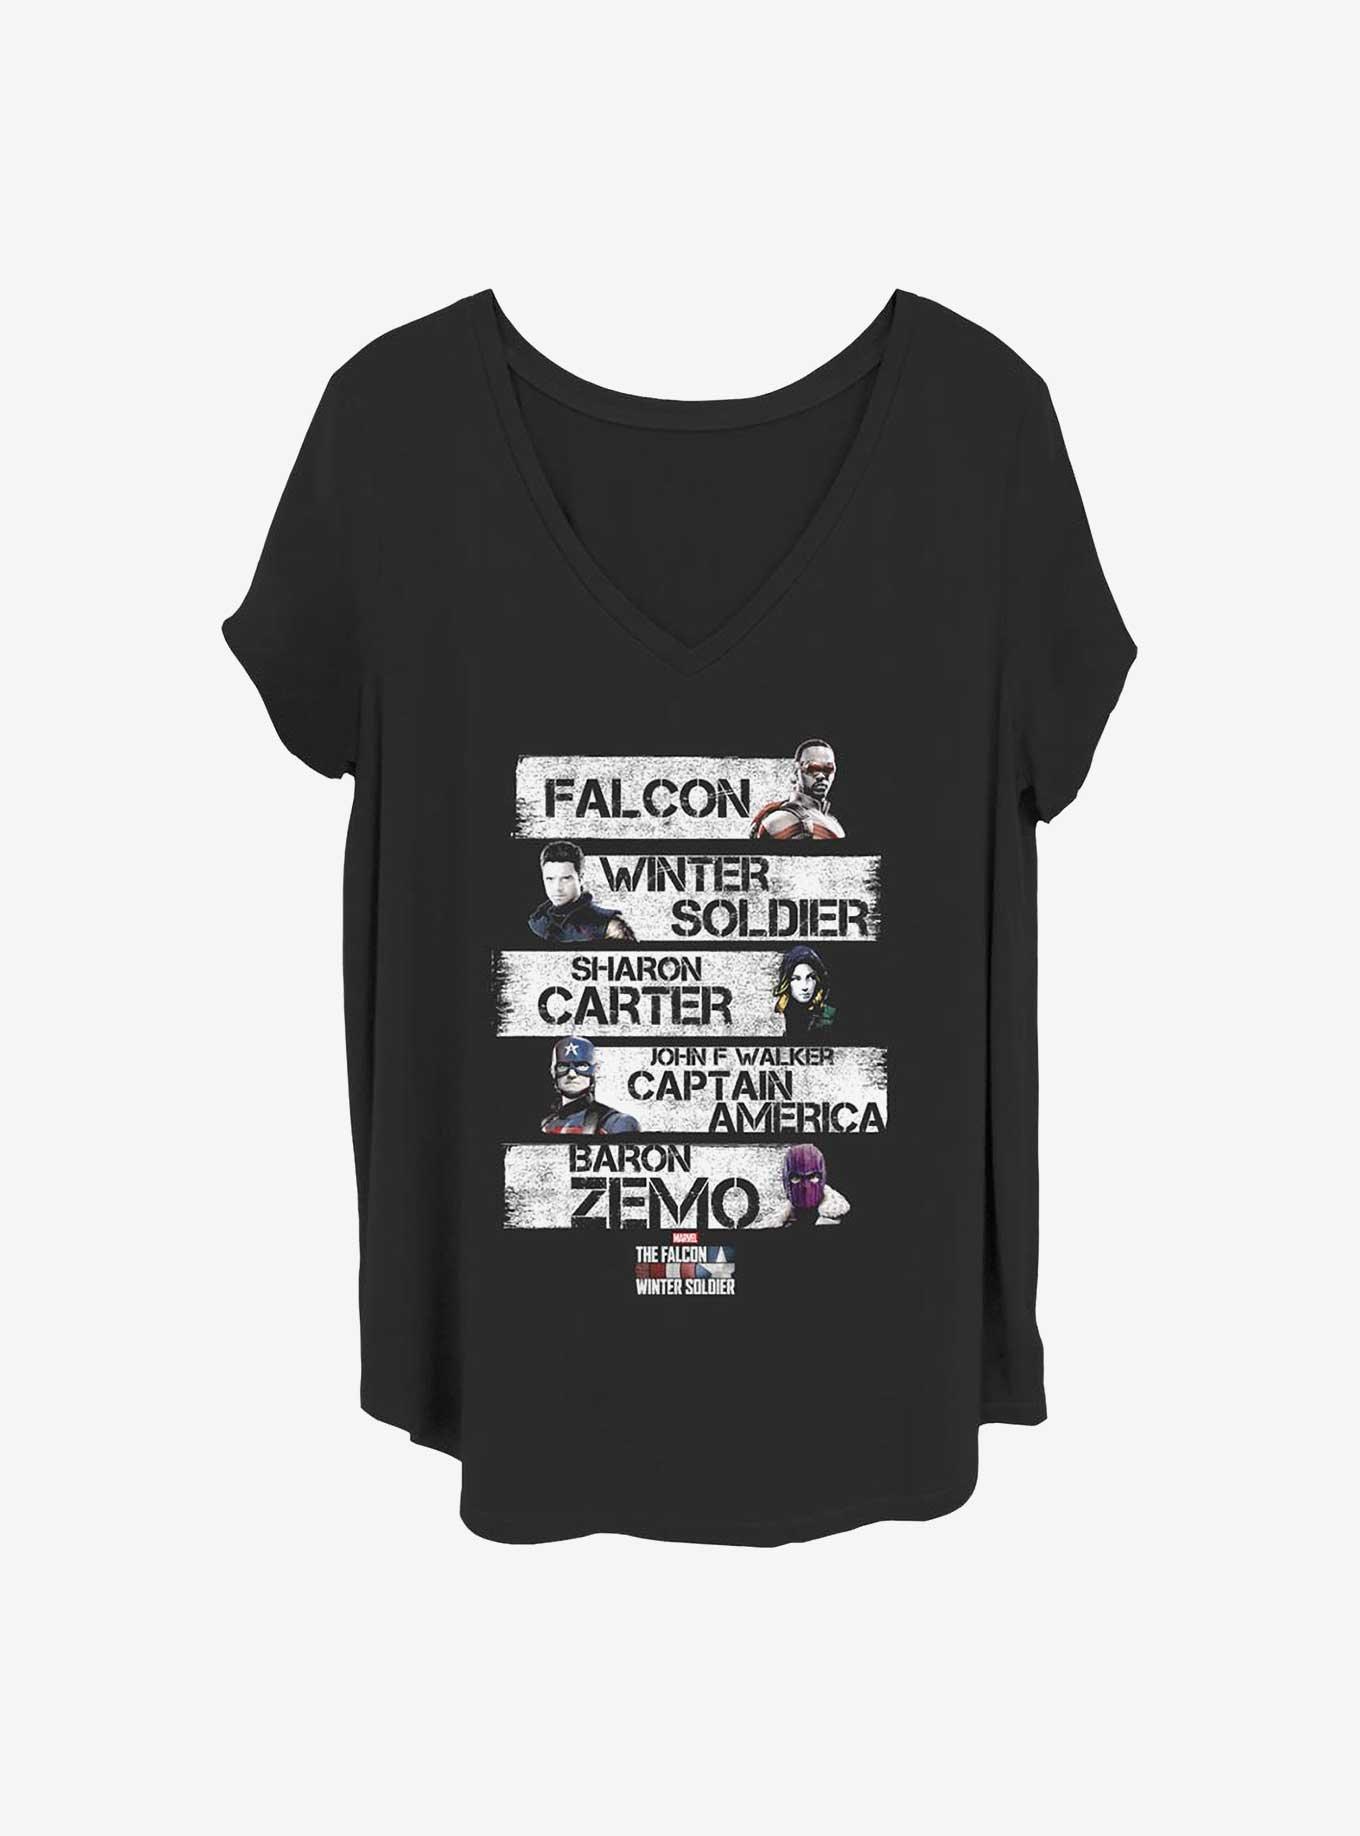 Marvel The Falcon and the Winter Soldier Character Stack Girls T-Shirt Plus Size, BLACK, hi-res